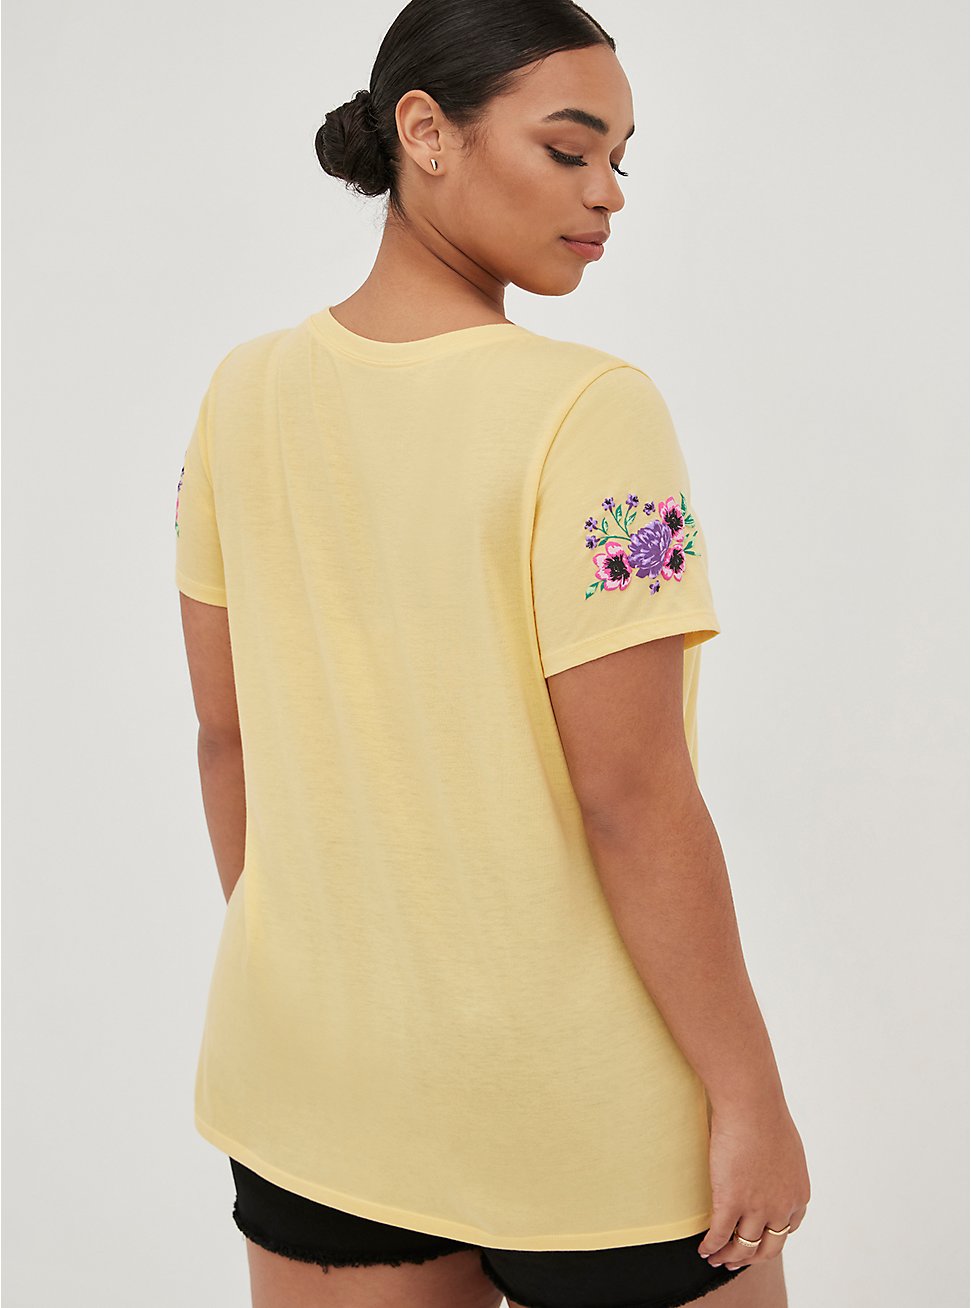 Everyday Tee - Signature Jersey Floral Puff Graphic Yellow, YELLOW, hi-res